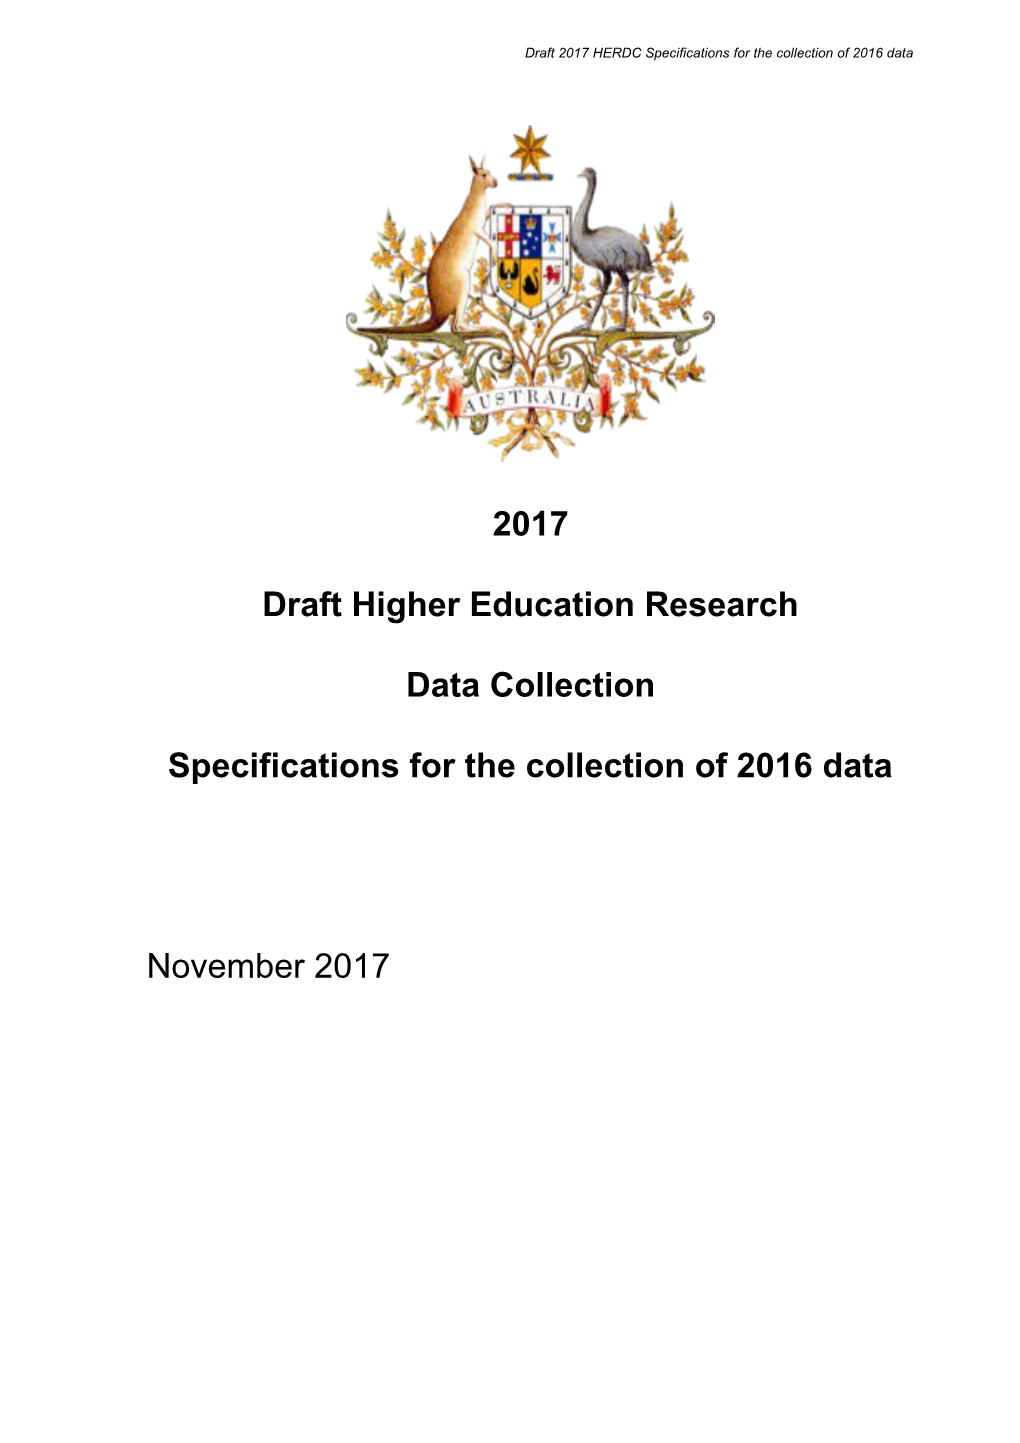 Draft 2015 HERDC Specifications for the Collection of 2014 Data